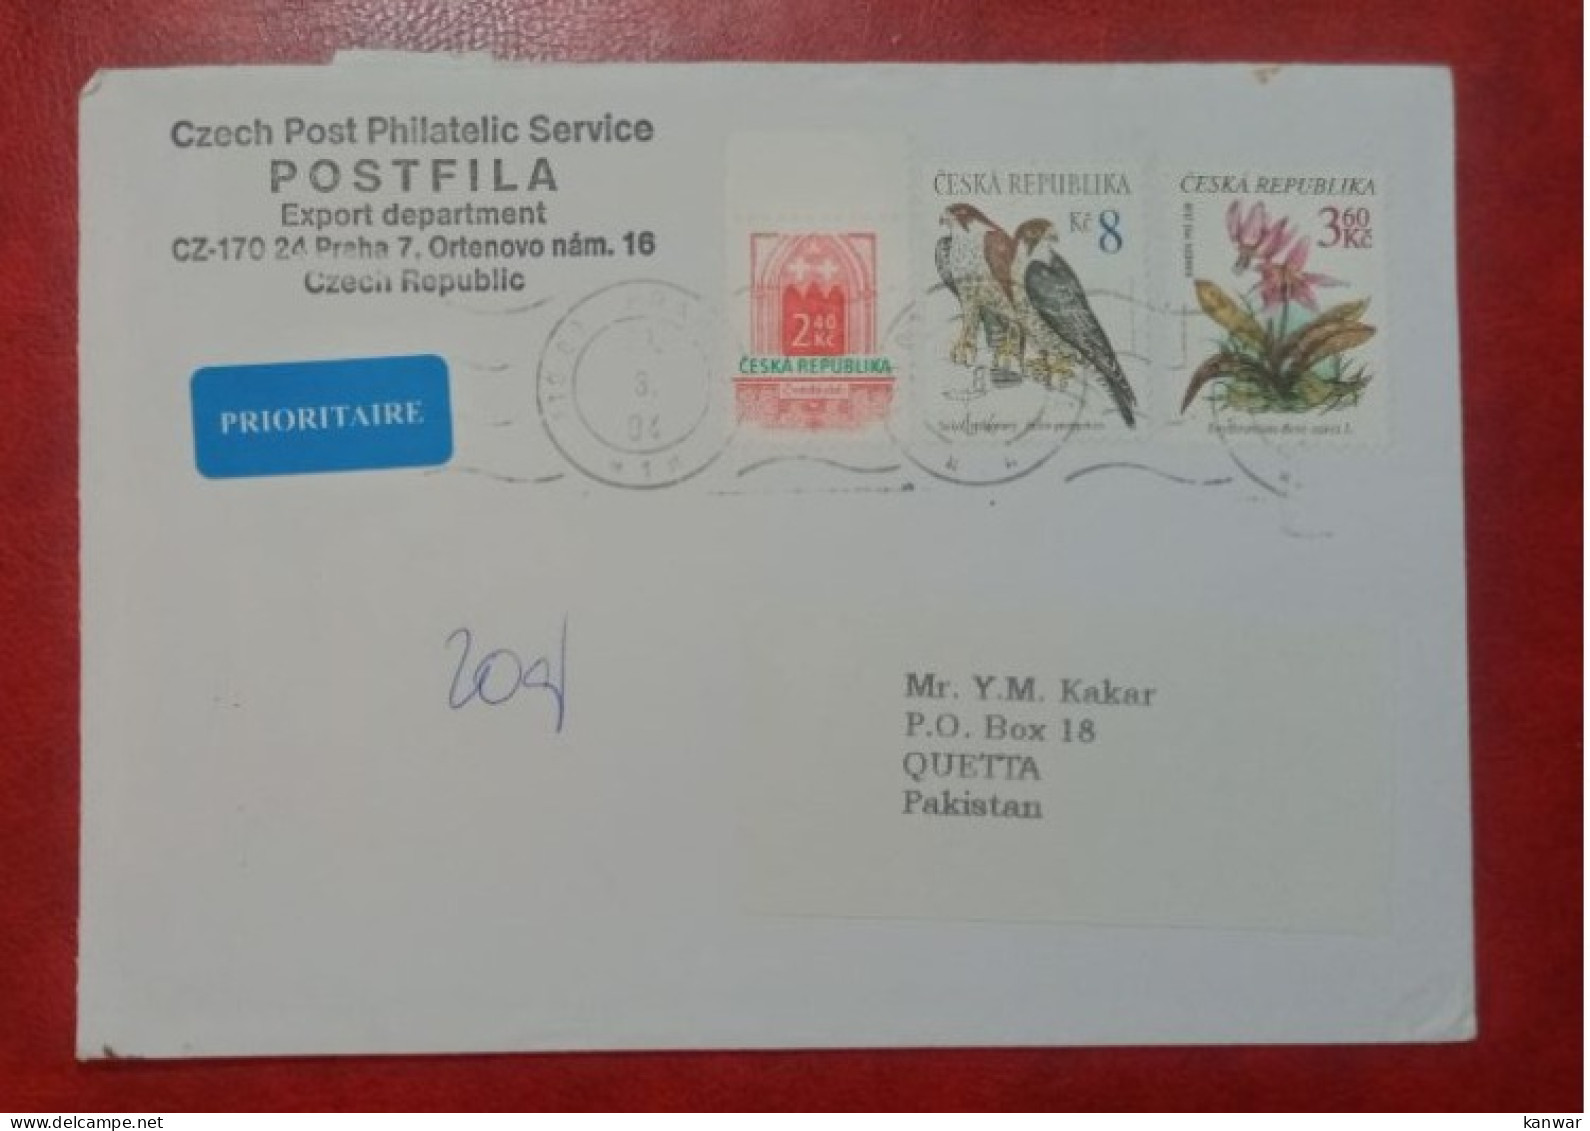 2004 CZECH REPUBLIC TO PAKISTAN USED COVER WITH STAMPS FLOWERS EAGLE BIRDS - Briefe U. Dokumente